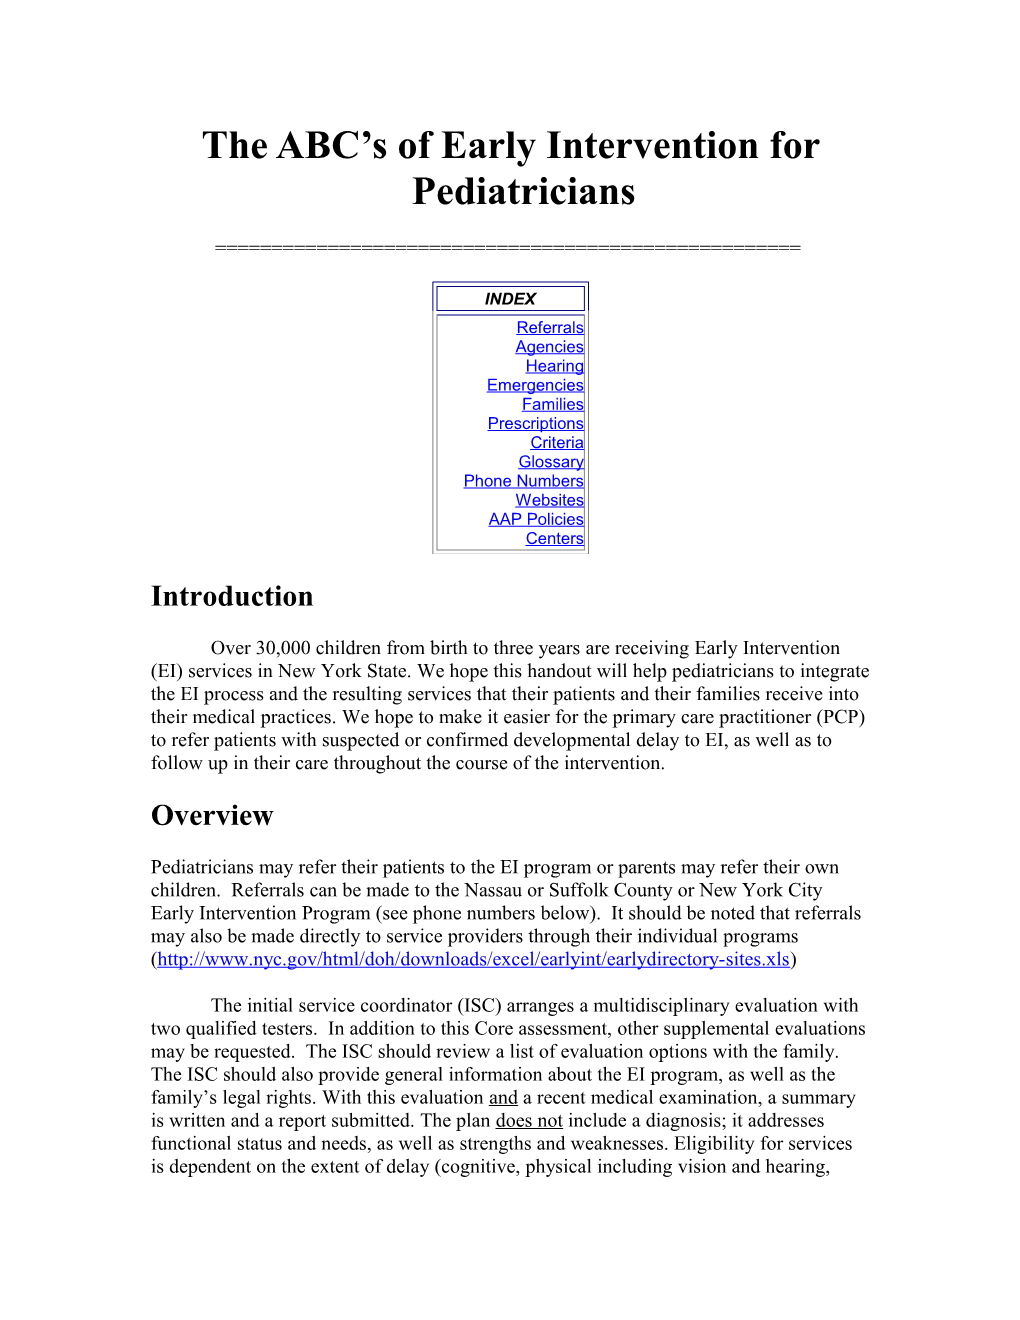 The ABC S of Early Intervention for Pediatricians